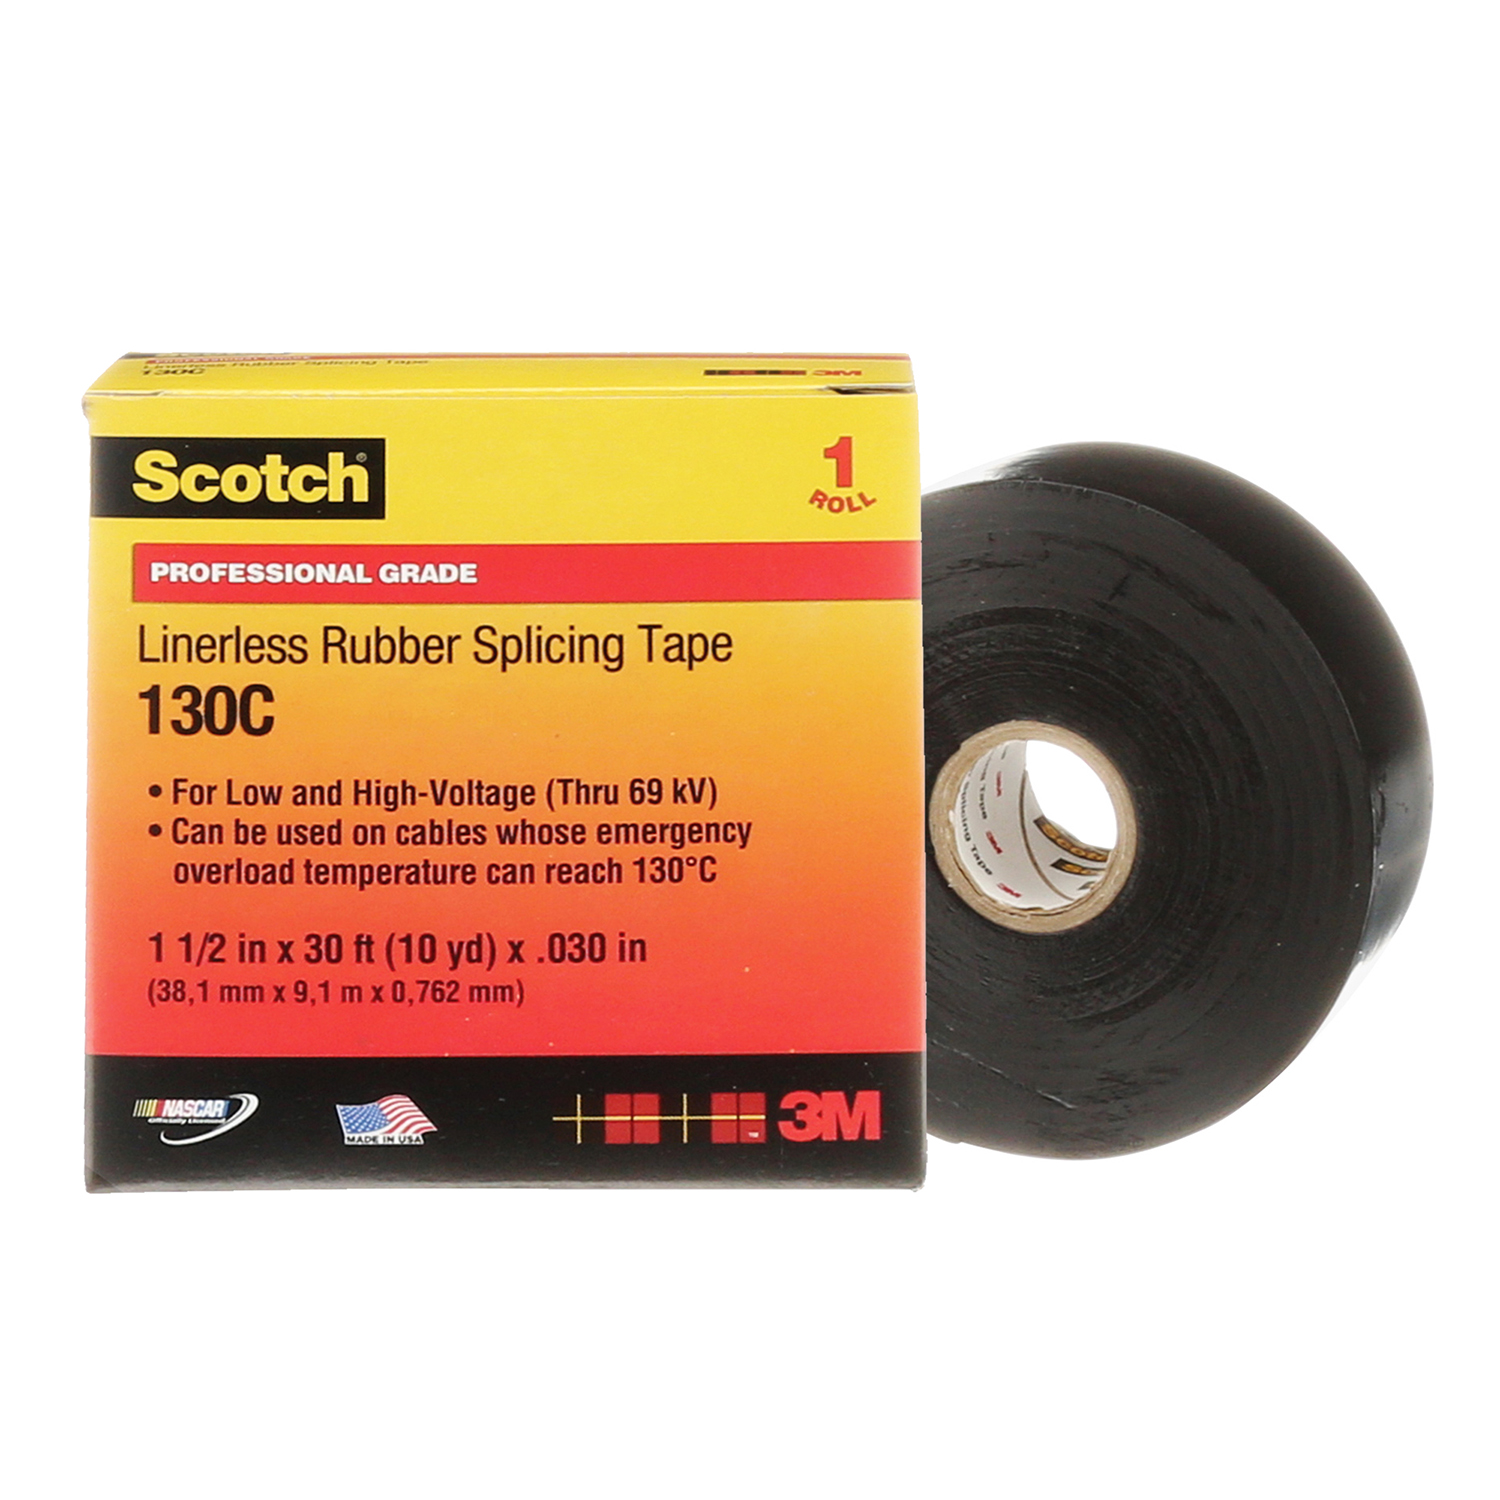 NEW 3M Scotch 130C Linerless Rubber Splicing Tape 3/4" x 30 ft x.030" 10 Yd 